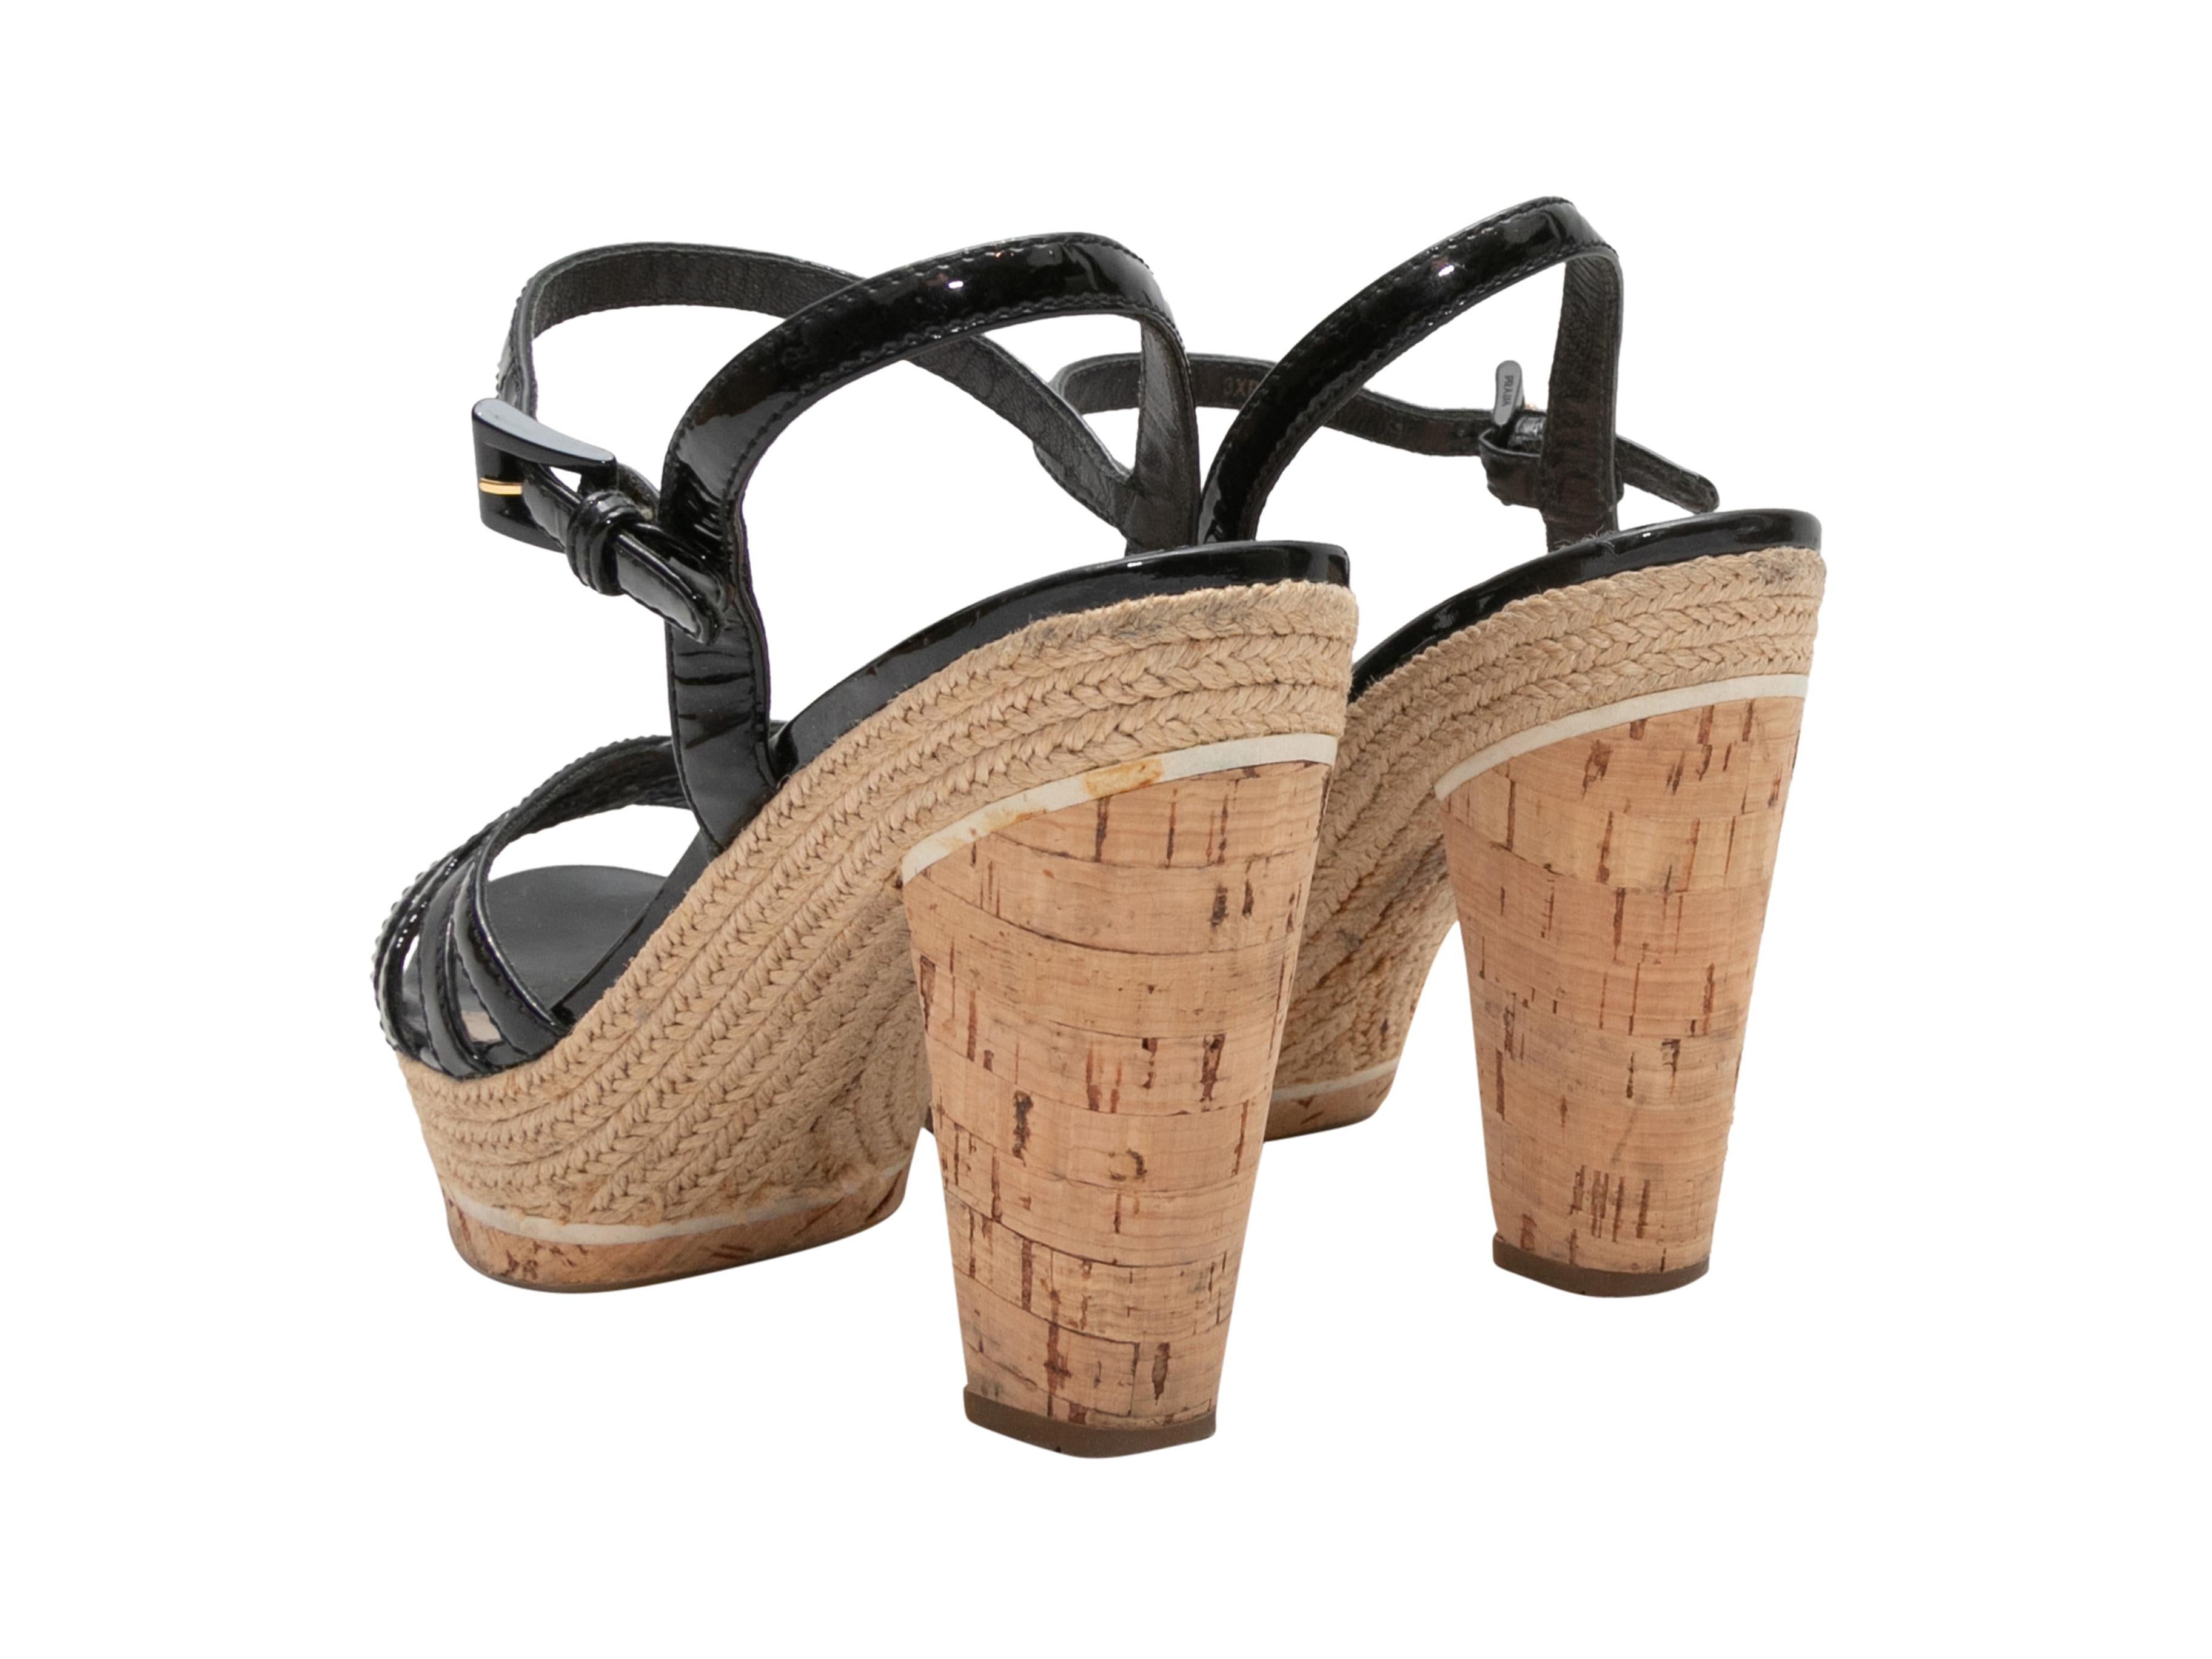 Black patent leather strappy espadrille heeled sandals by Prada. Jute trim at cork heels. Buckle closures at ankle straps. 1